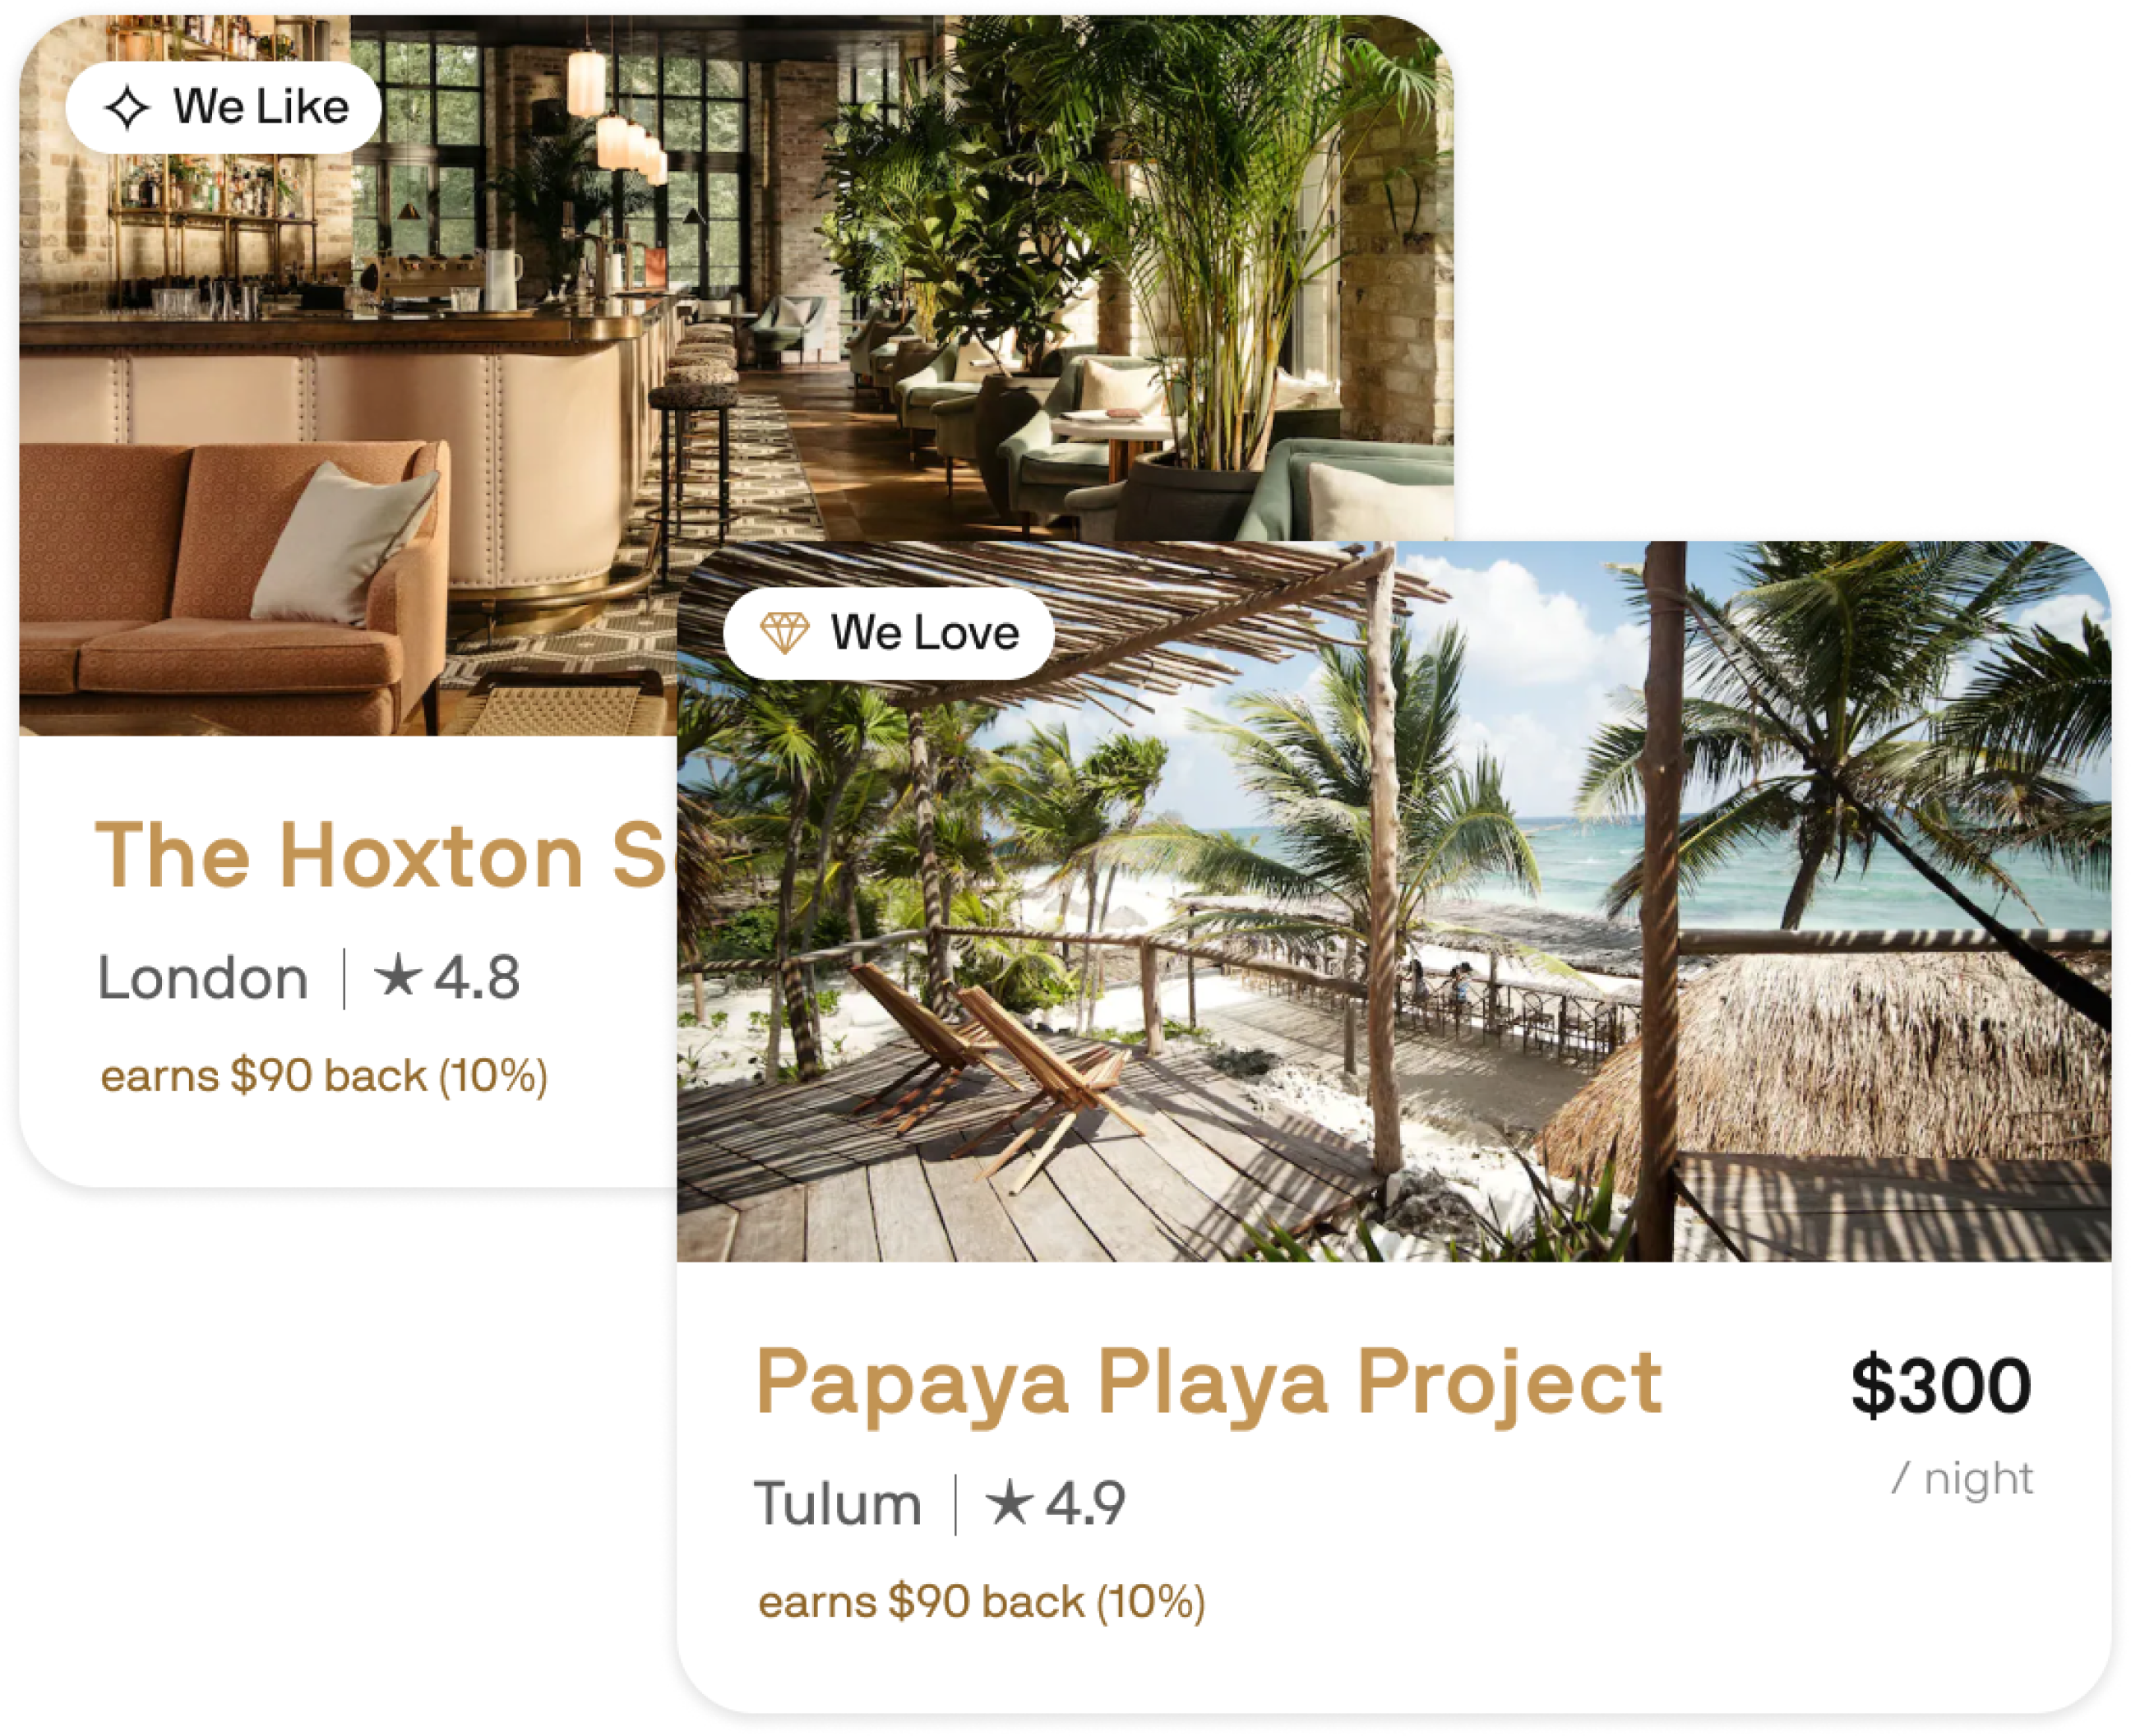 Previews at the properties cards from the Safara app